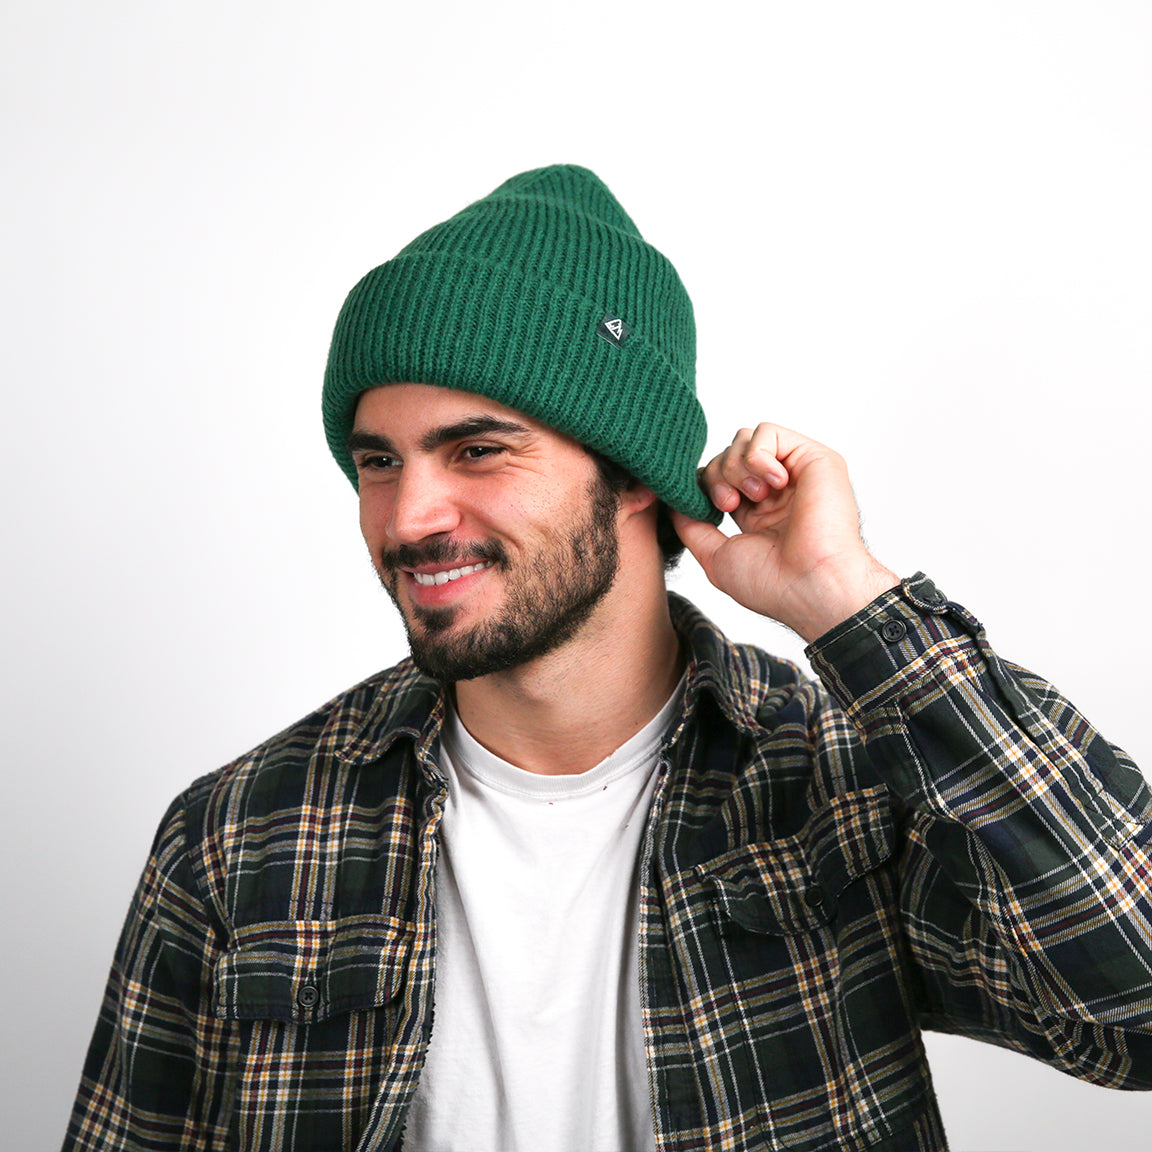 A person is smiling while wearing a ribbed knit beanie in a deep forest green shade. The beanie has a relaxed fit with a rolled-up brim, providing a casual and cozy style.